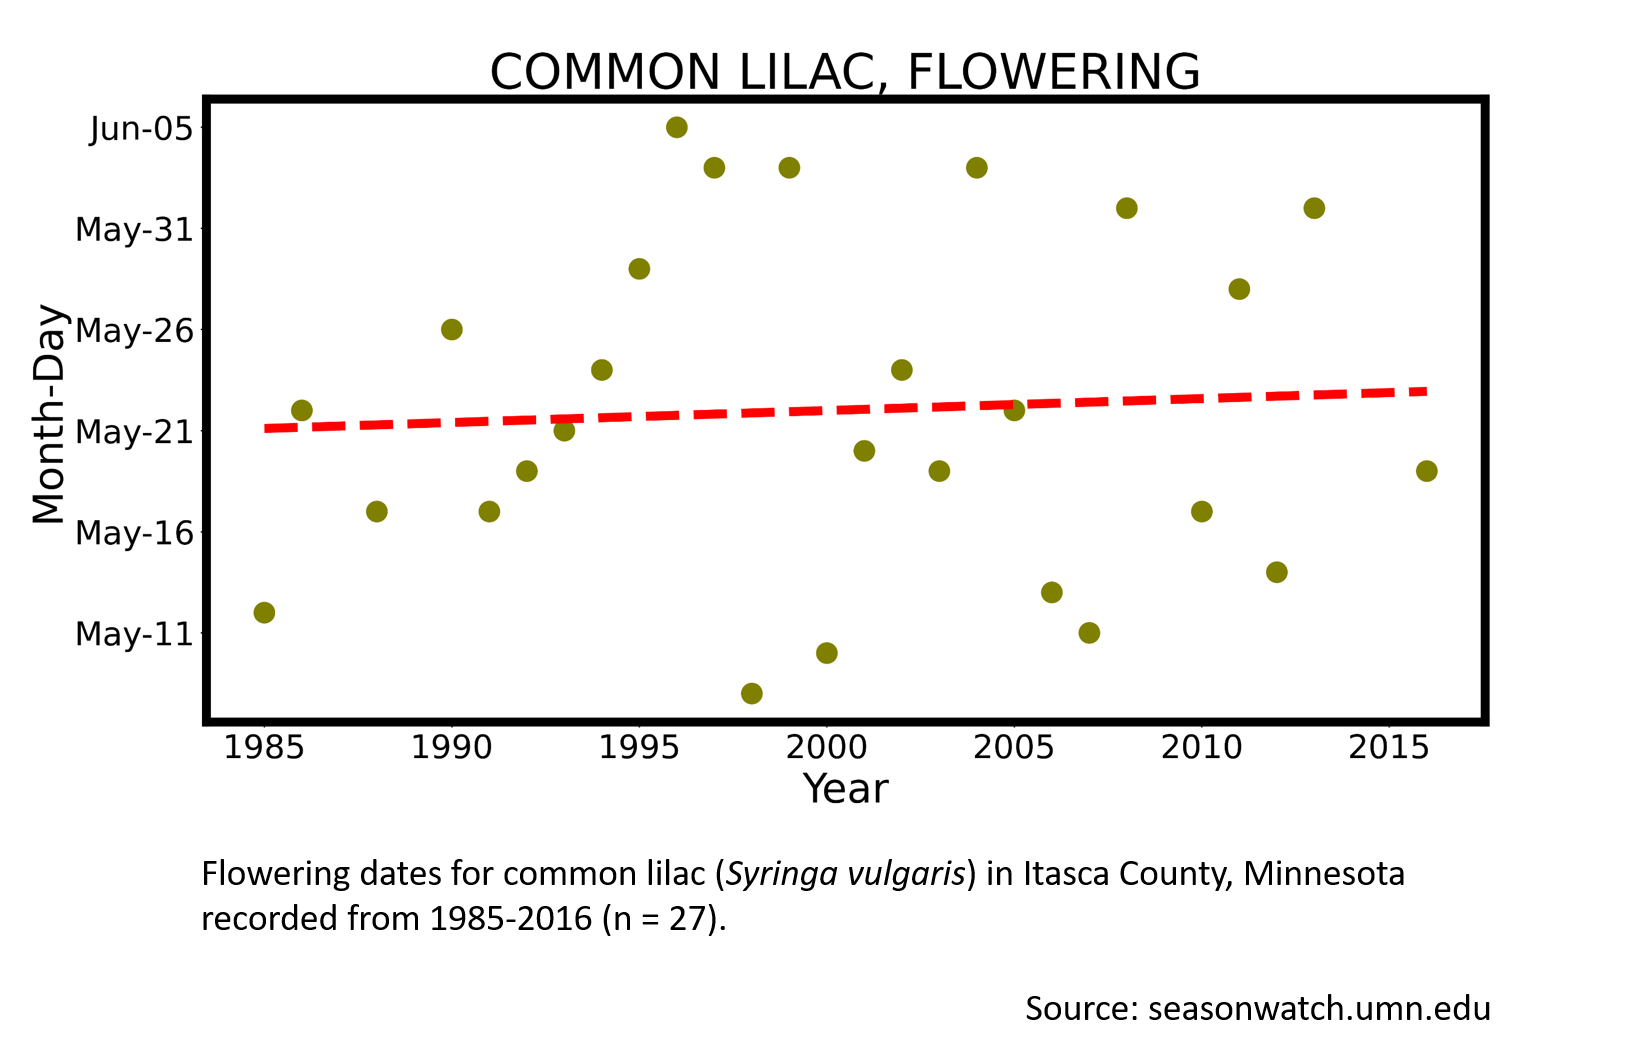 Scatterplot showing common lilac phenology observations in Itasca County, Minnesota